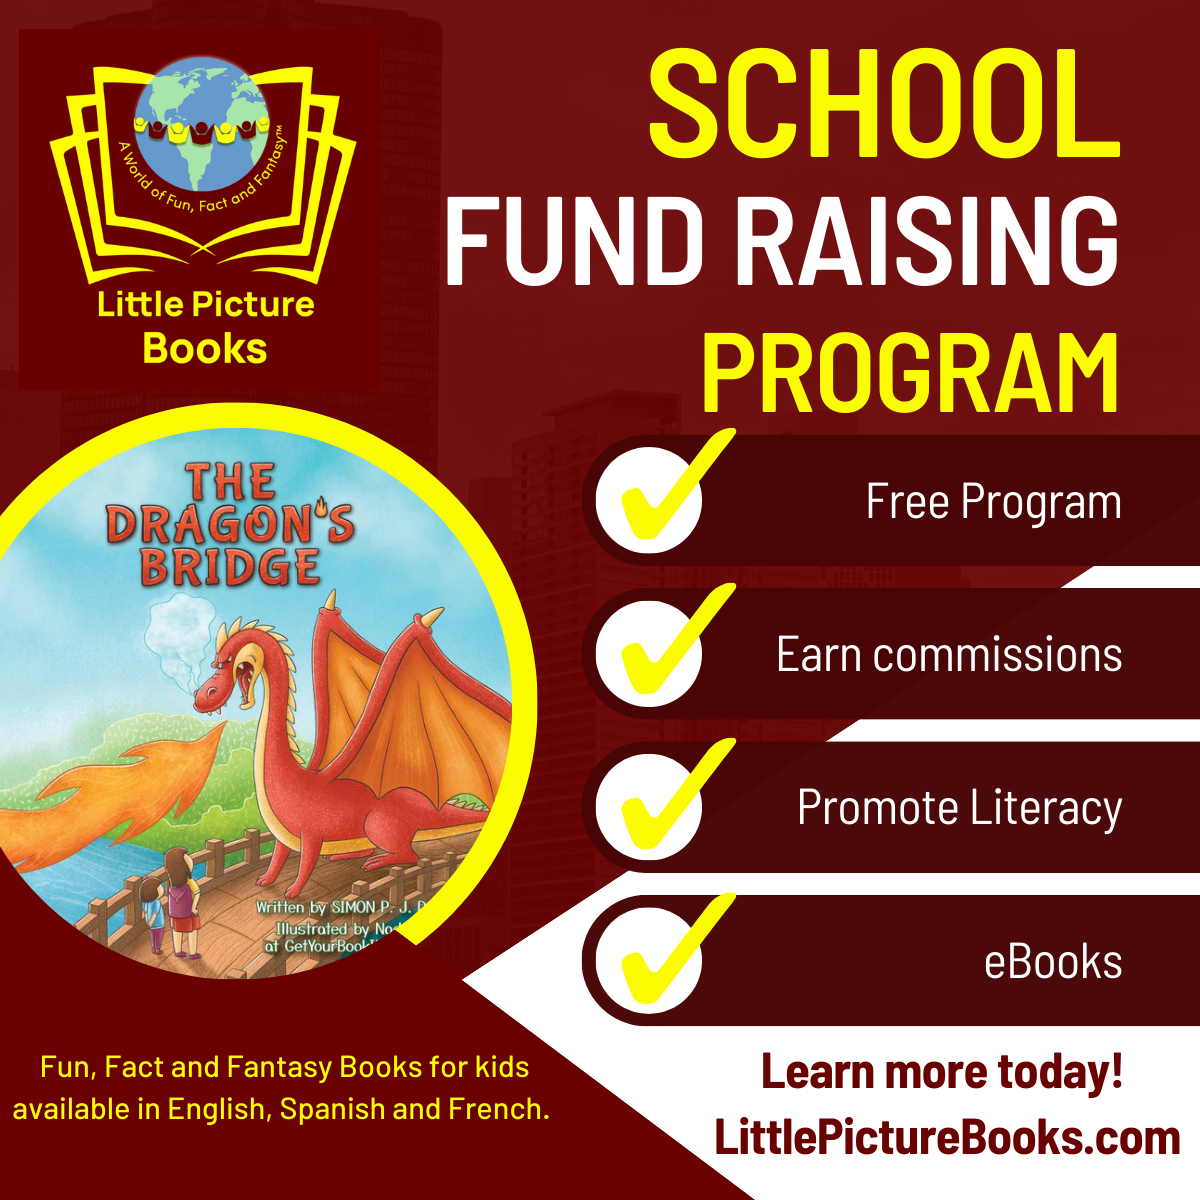 Empowering Education: How Little Picture Books Revolutionizes School Fundraising and Promotes Global Literacy